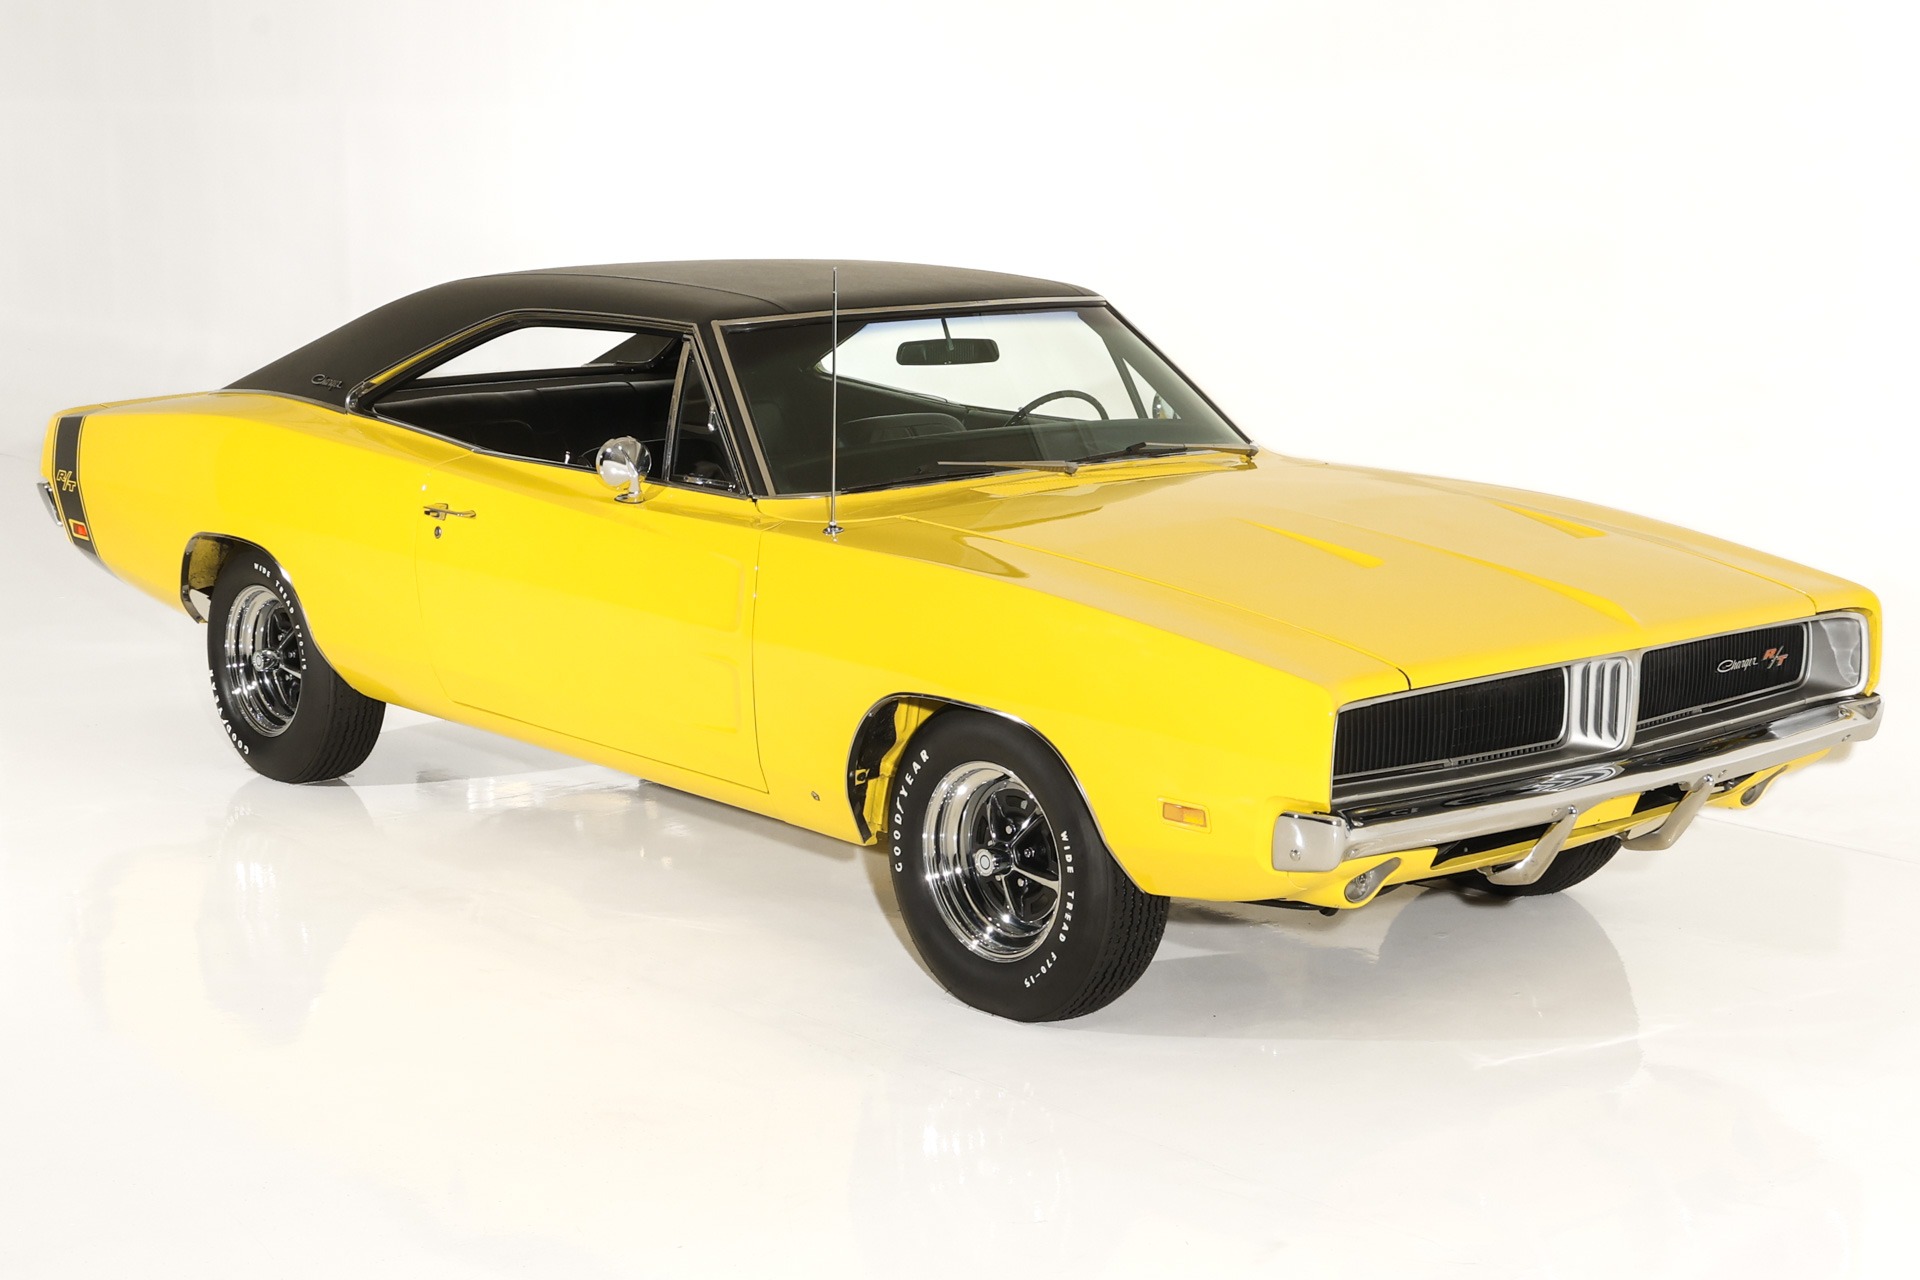 For Sale Used 1969 Dodge Charger RT 440/375 Rotisserie Restored | American Dream Machines Des Moines IA 50309